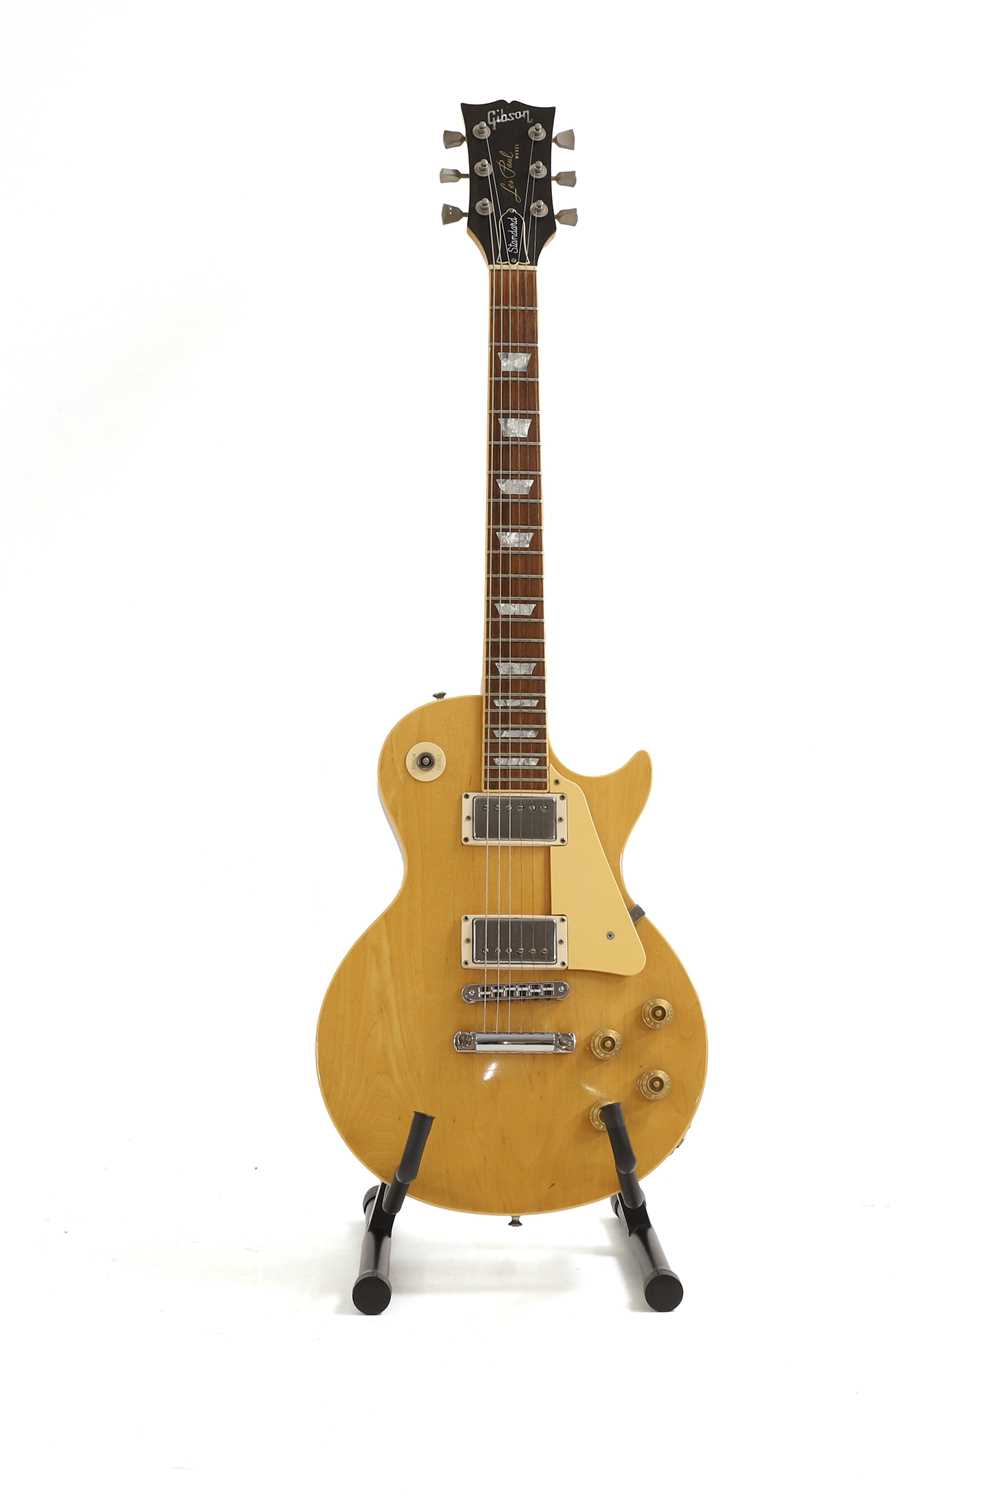 A 1979 Gibson Les Paul 'Standard' electric guitar, - Image 4 of 14